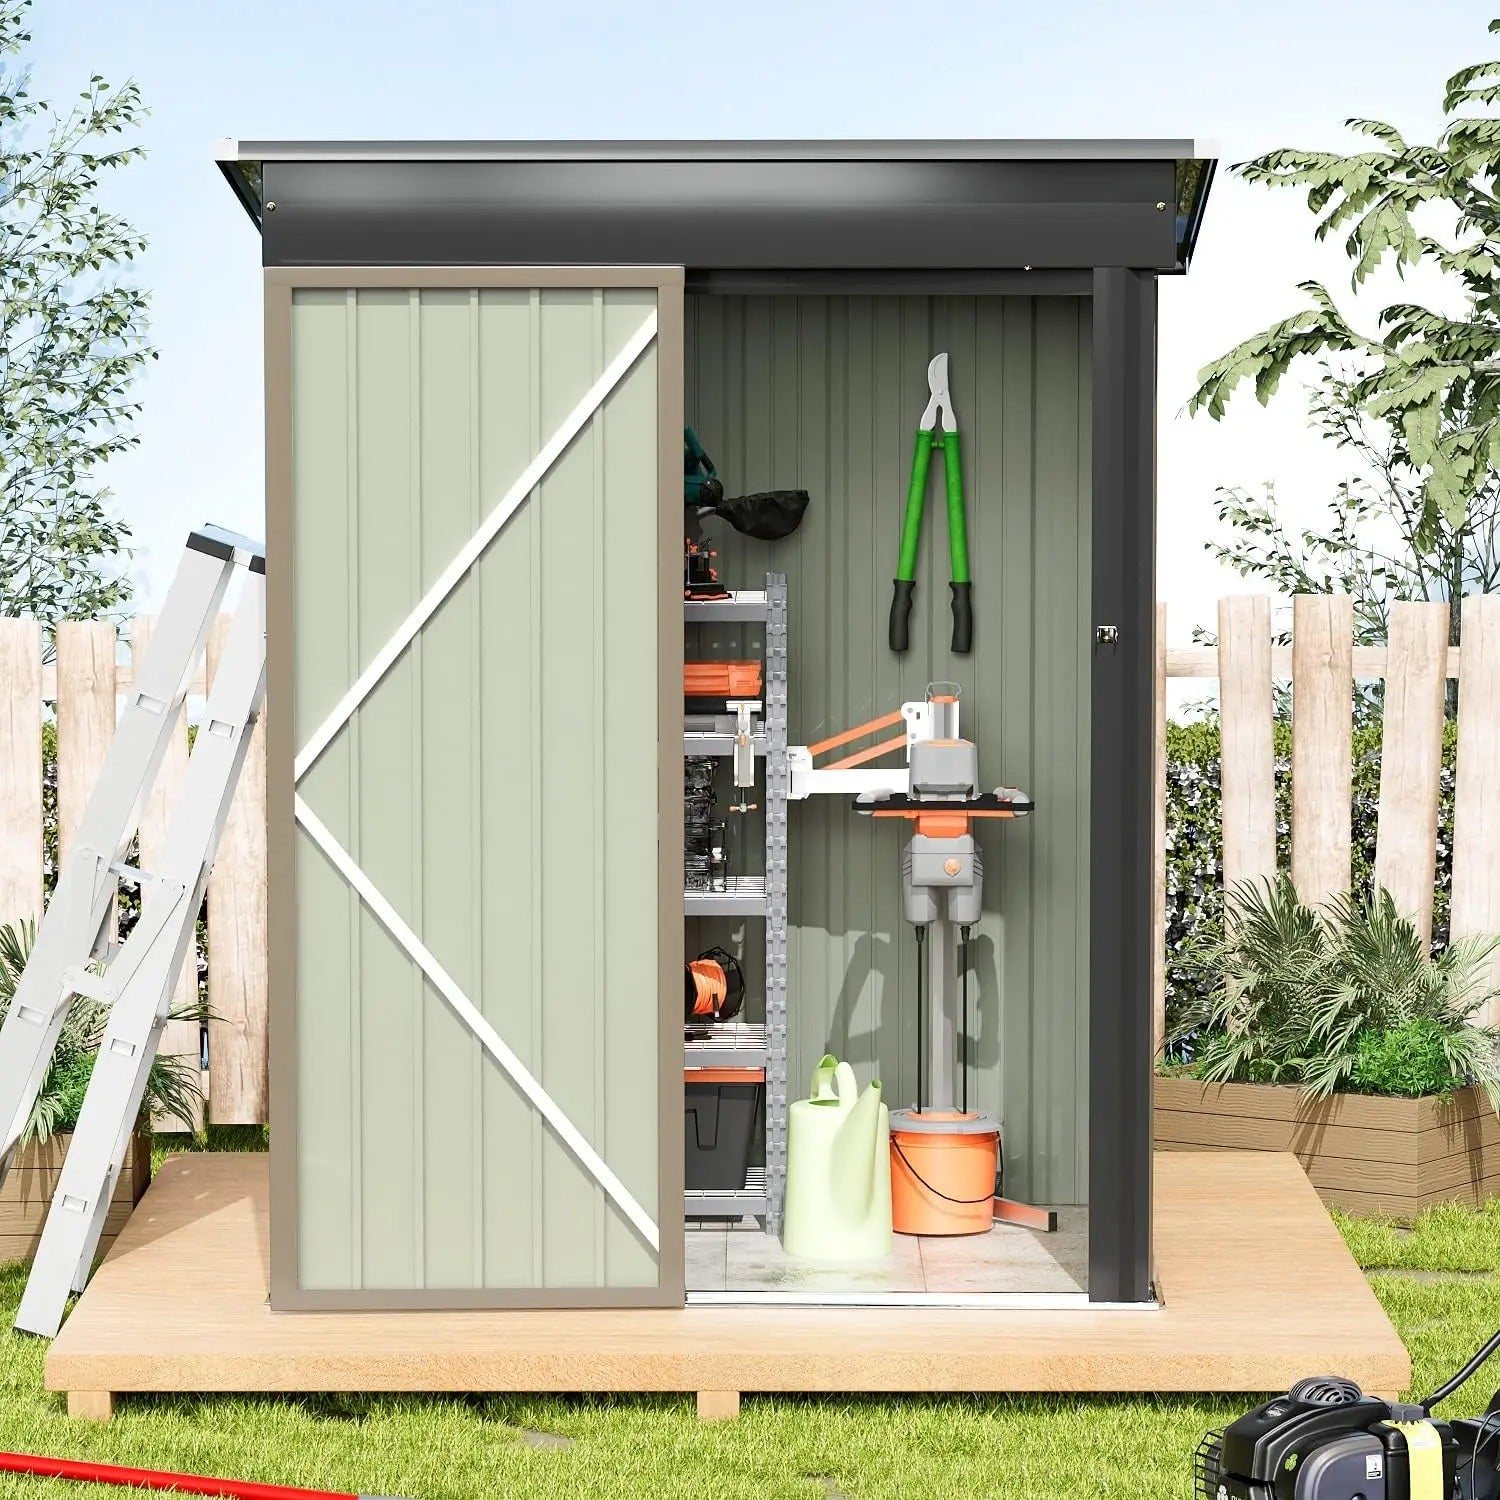 Greesum Metal Outdoor Storage Shed 5FT x 3FT, Steel Utility Tool Shed Storage House with Door & Lock - Elite Edge Essentials 